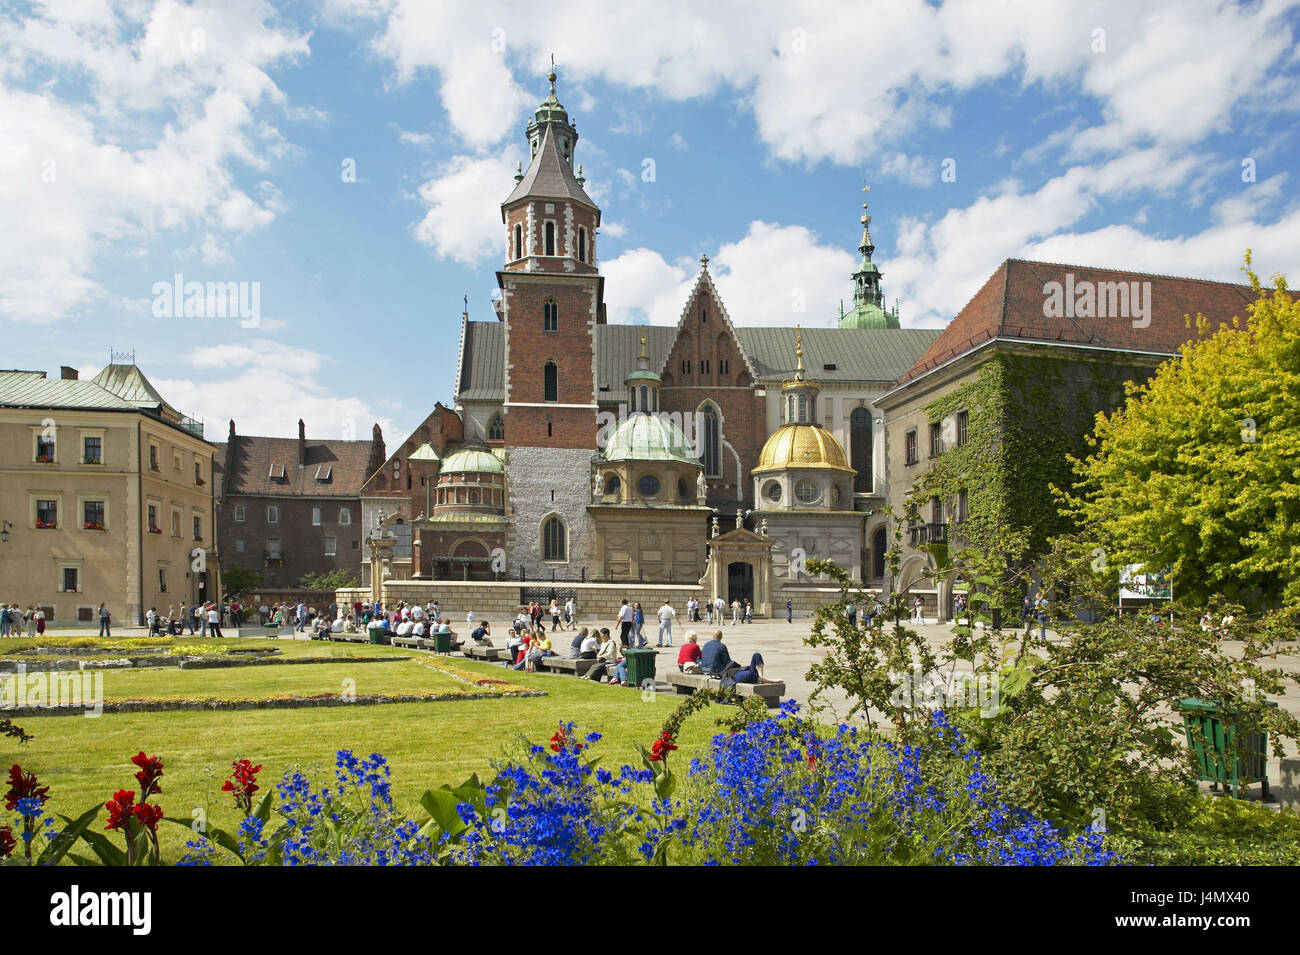 Poland, Cracow, Wawel, cathedral, visitor Europe, East Europe, Poland, Rzeczpospolita Polska, Cracow, town, castle mountain, Wawel hill, place of interest, church, sacred construction, culture, tourism, summer, outside, flowers, detail Stock Photo